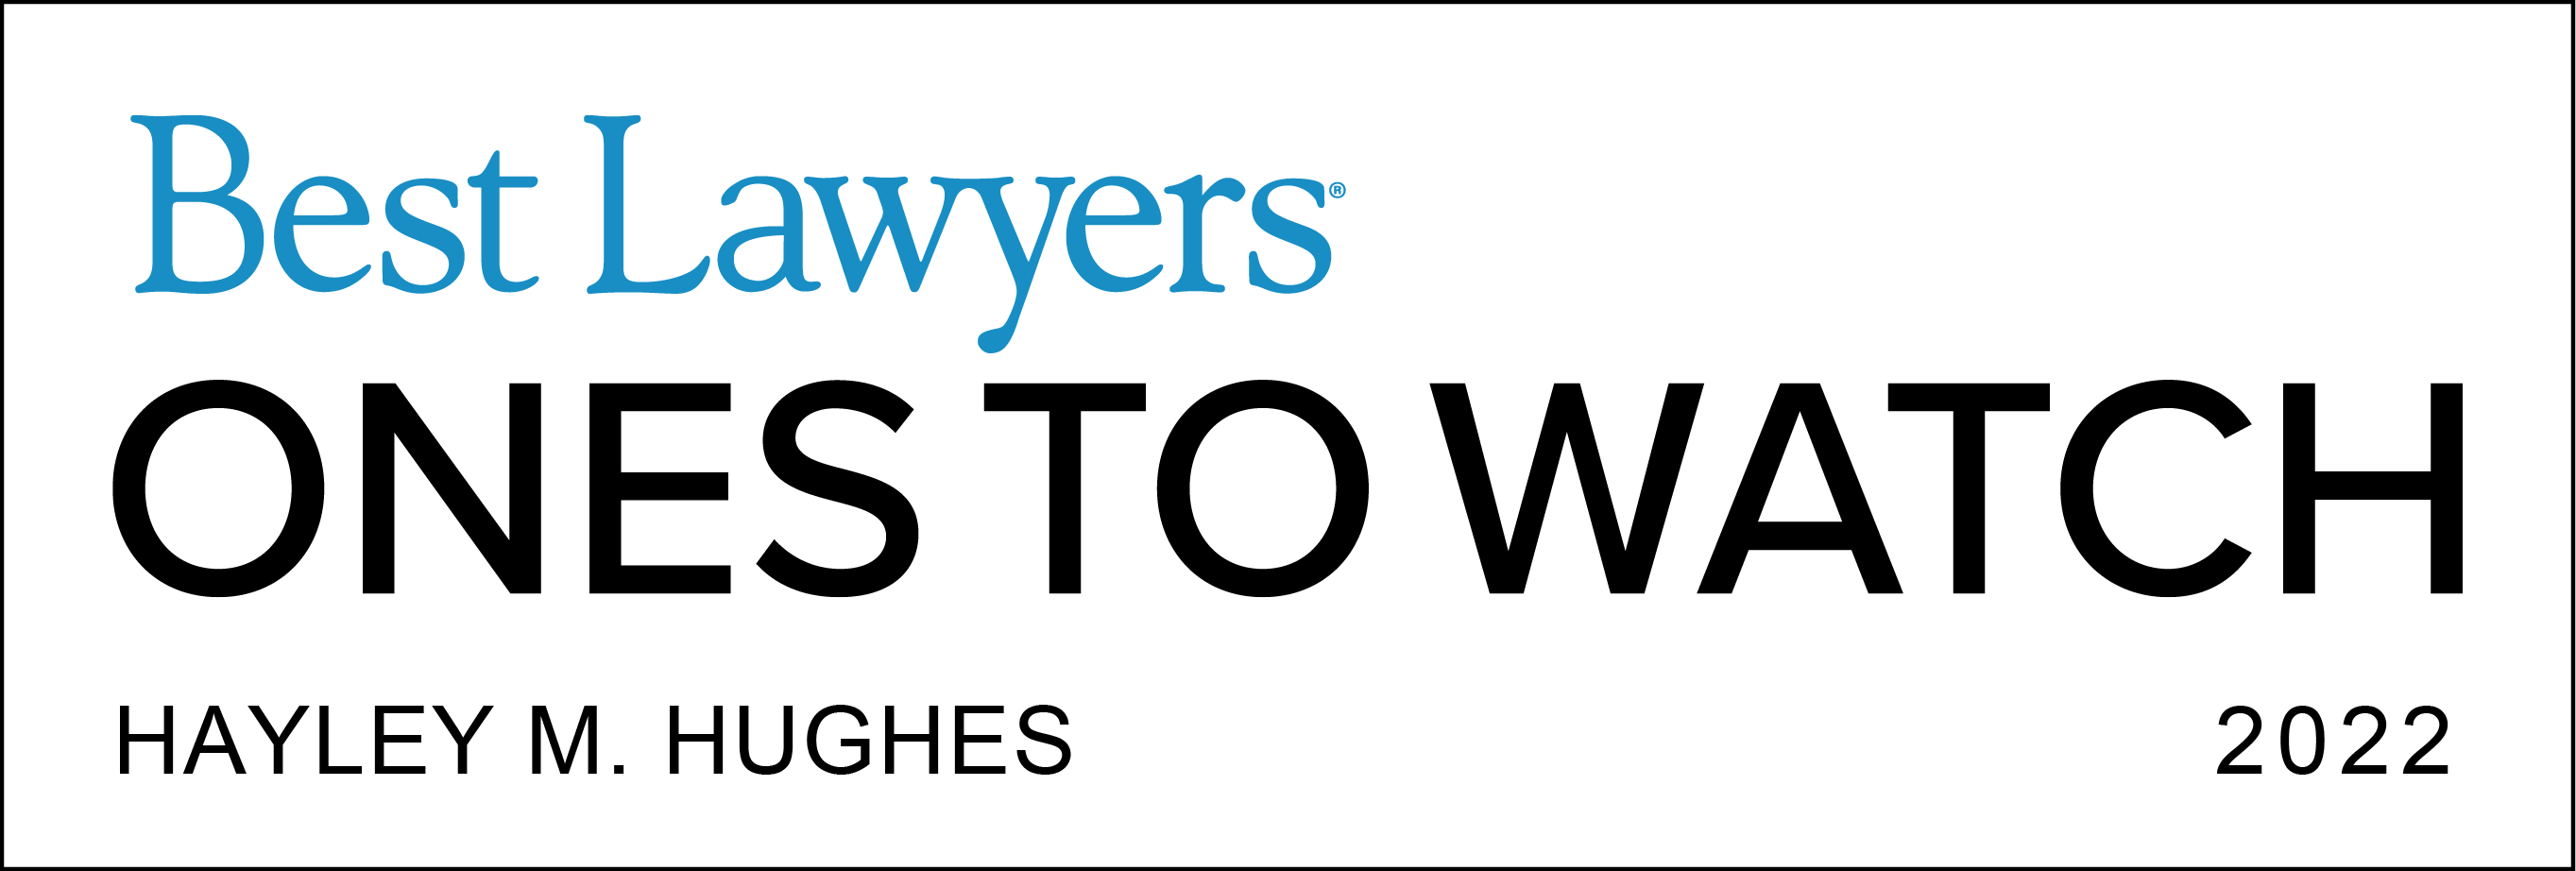 Hayley M. Hughes Best Lawyers Ones to Watch 2022